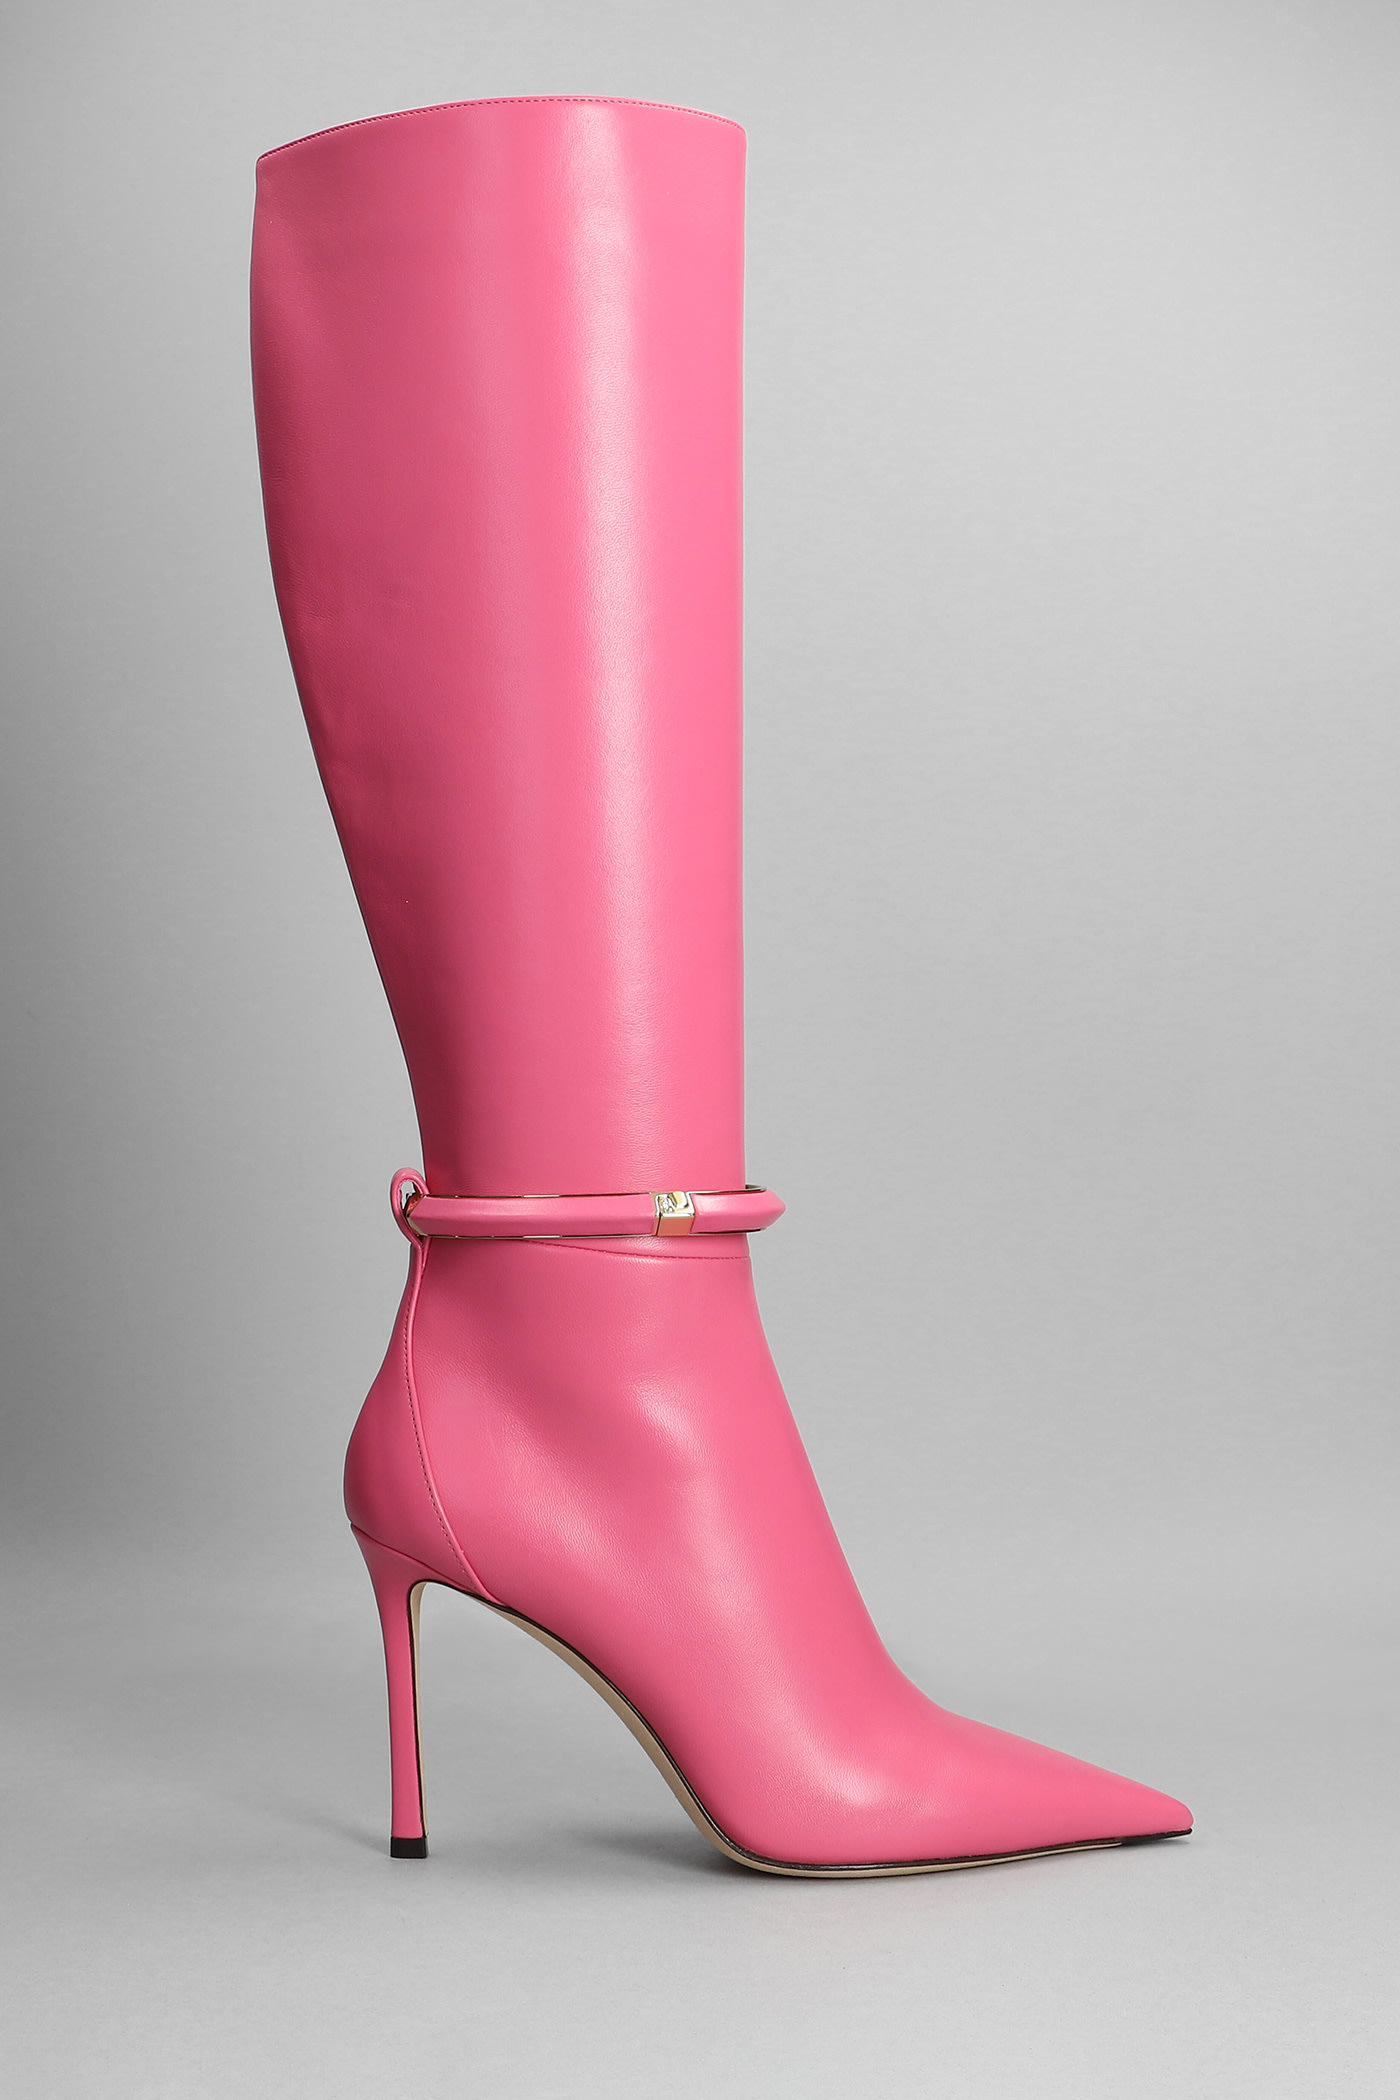 Jimmy Choo Dreece High Heels Boots In Rose-pink Leather